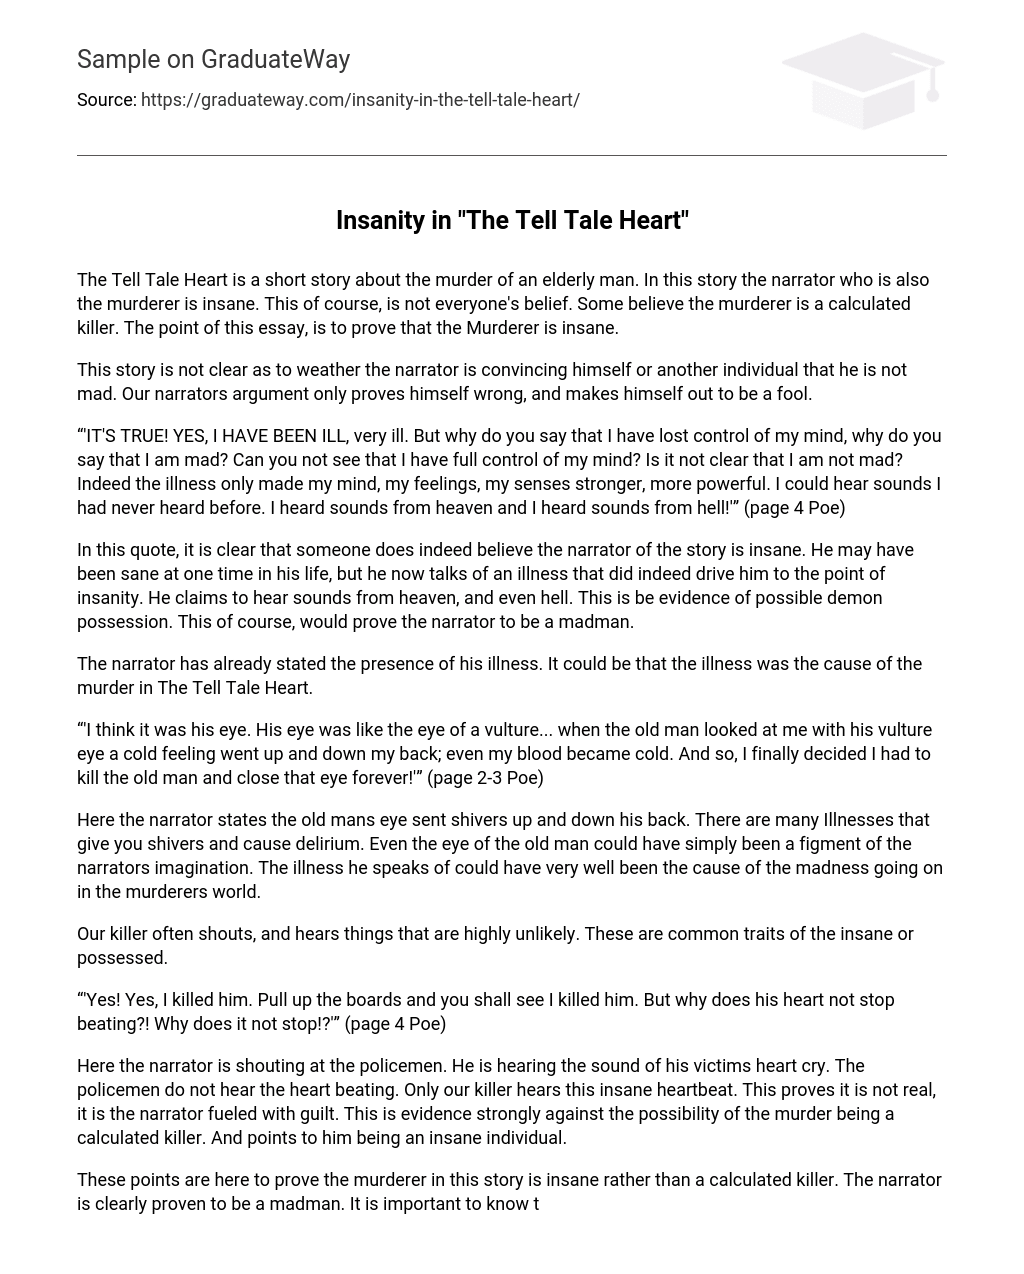 Insanity in “The Tell Tale Heart” Analysis